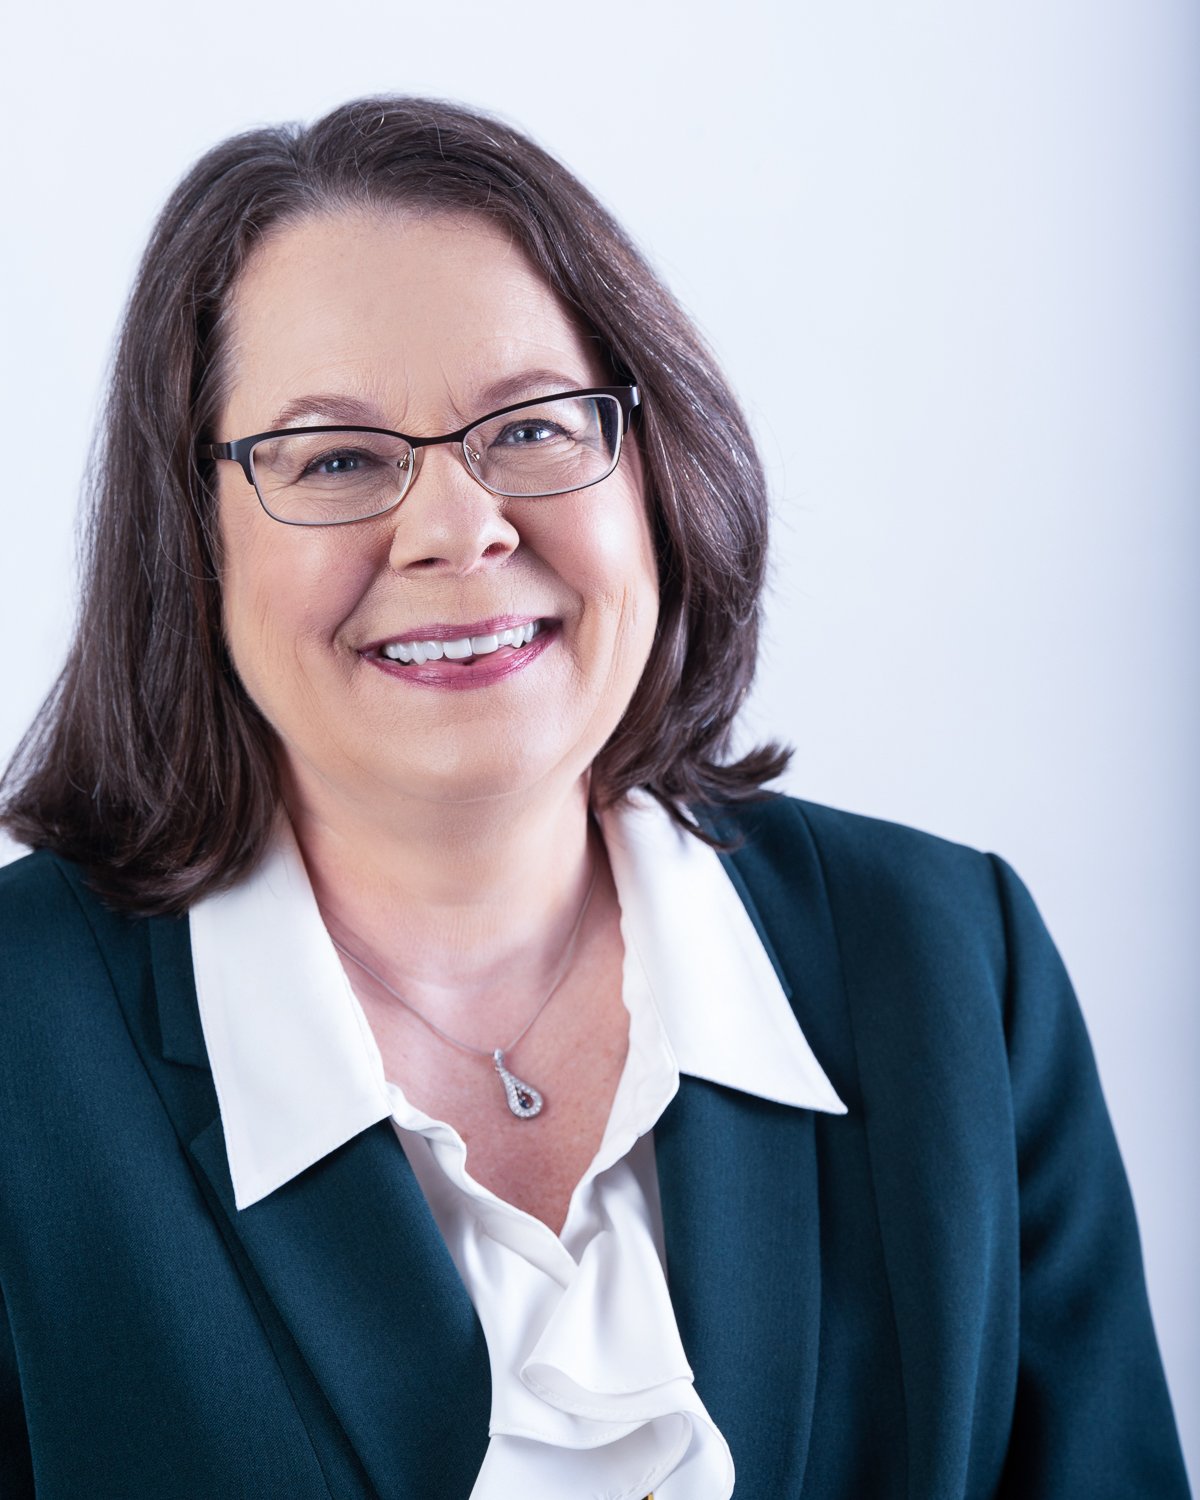 Professional Headshot of a woman in a dark suit in real estate-5615.jpg